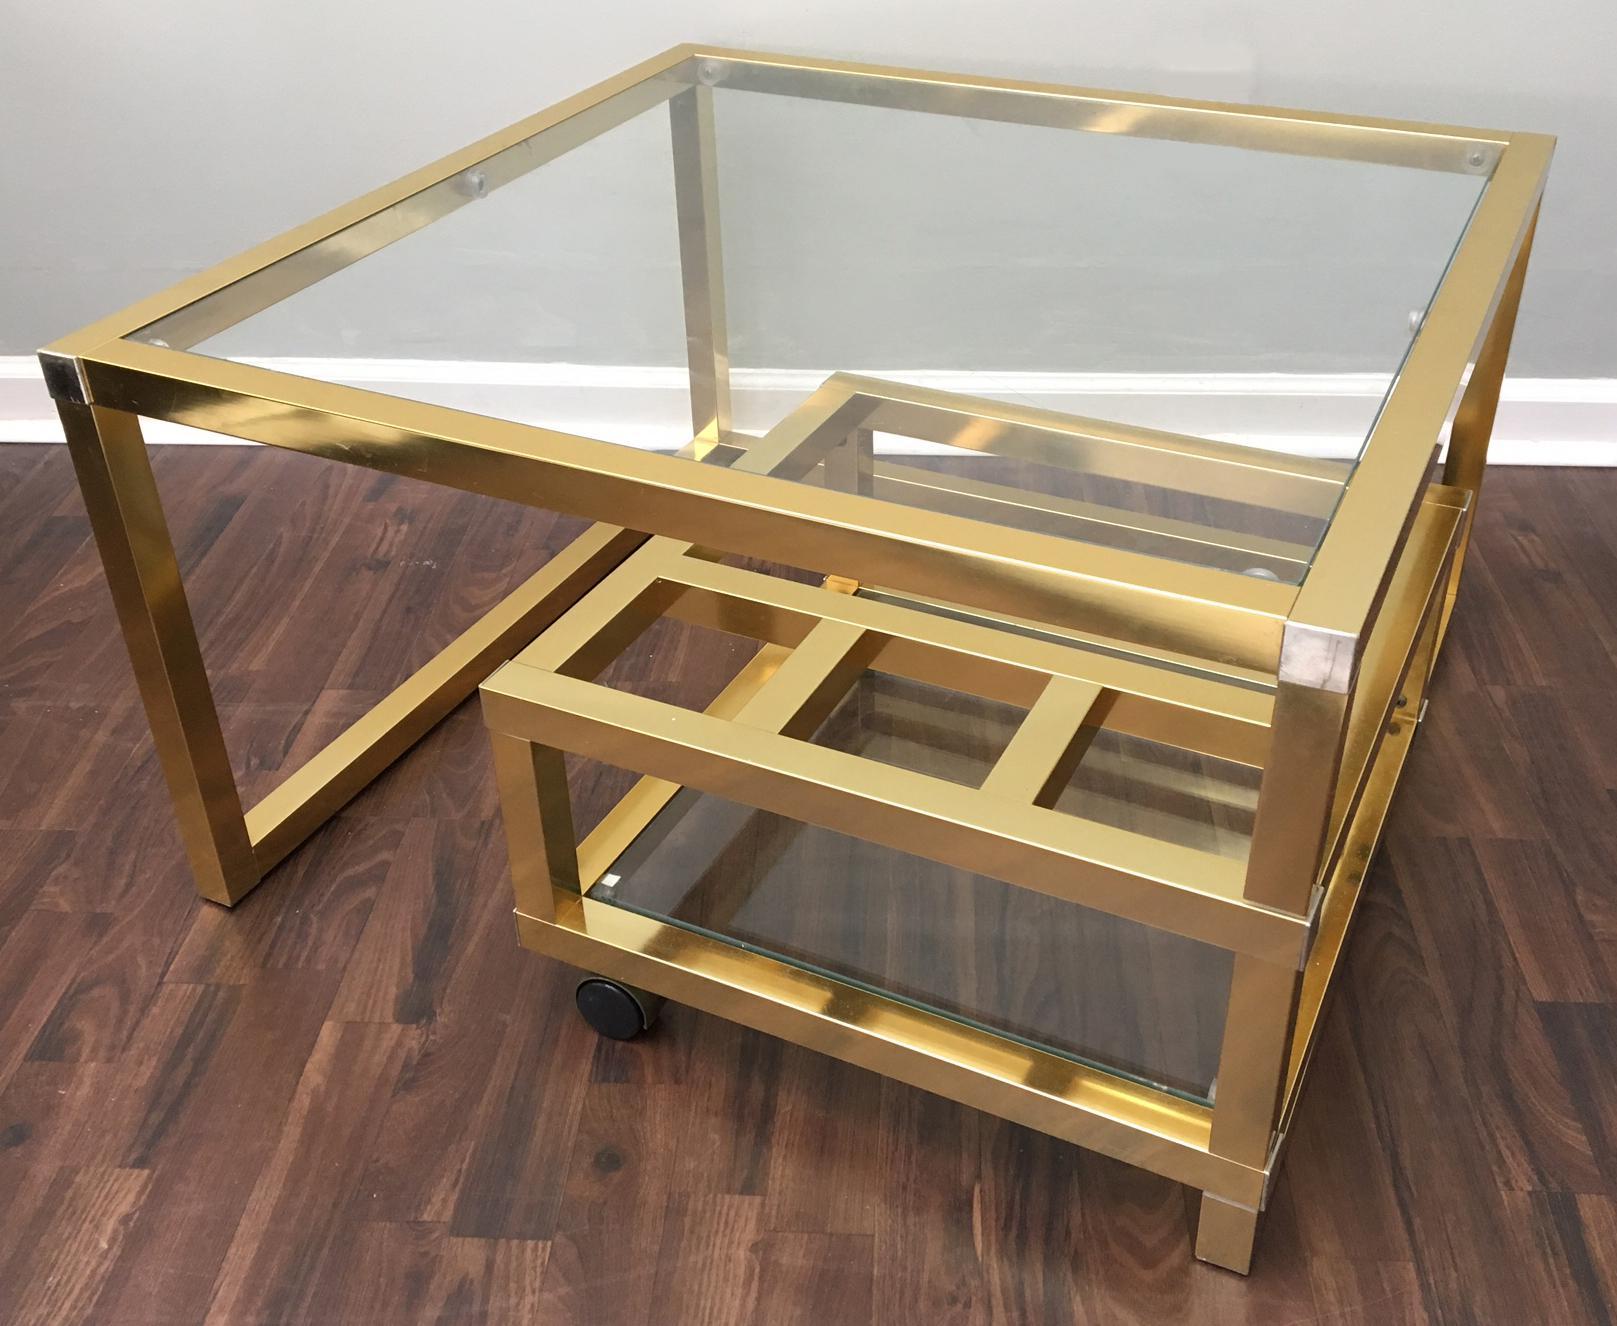 Mid-Century Modern brass coffee table inspired by Paul Evans, MIlo Baughman, and Maison Jansen.
Brass and chrome modernist coffee table features swing-out section with wine rack and glass shelf.
Very good vintage condition with minor signs of age